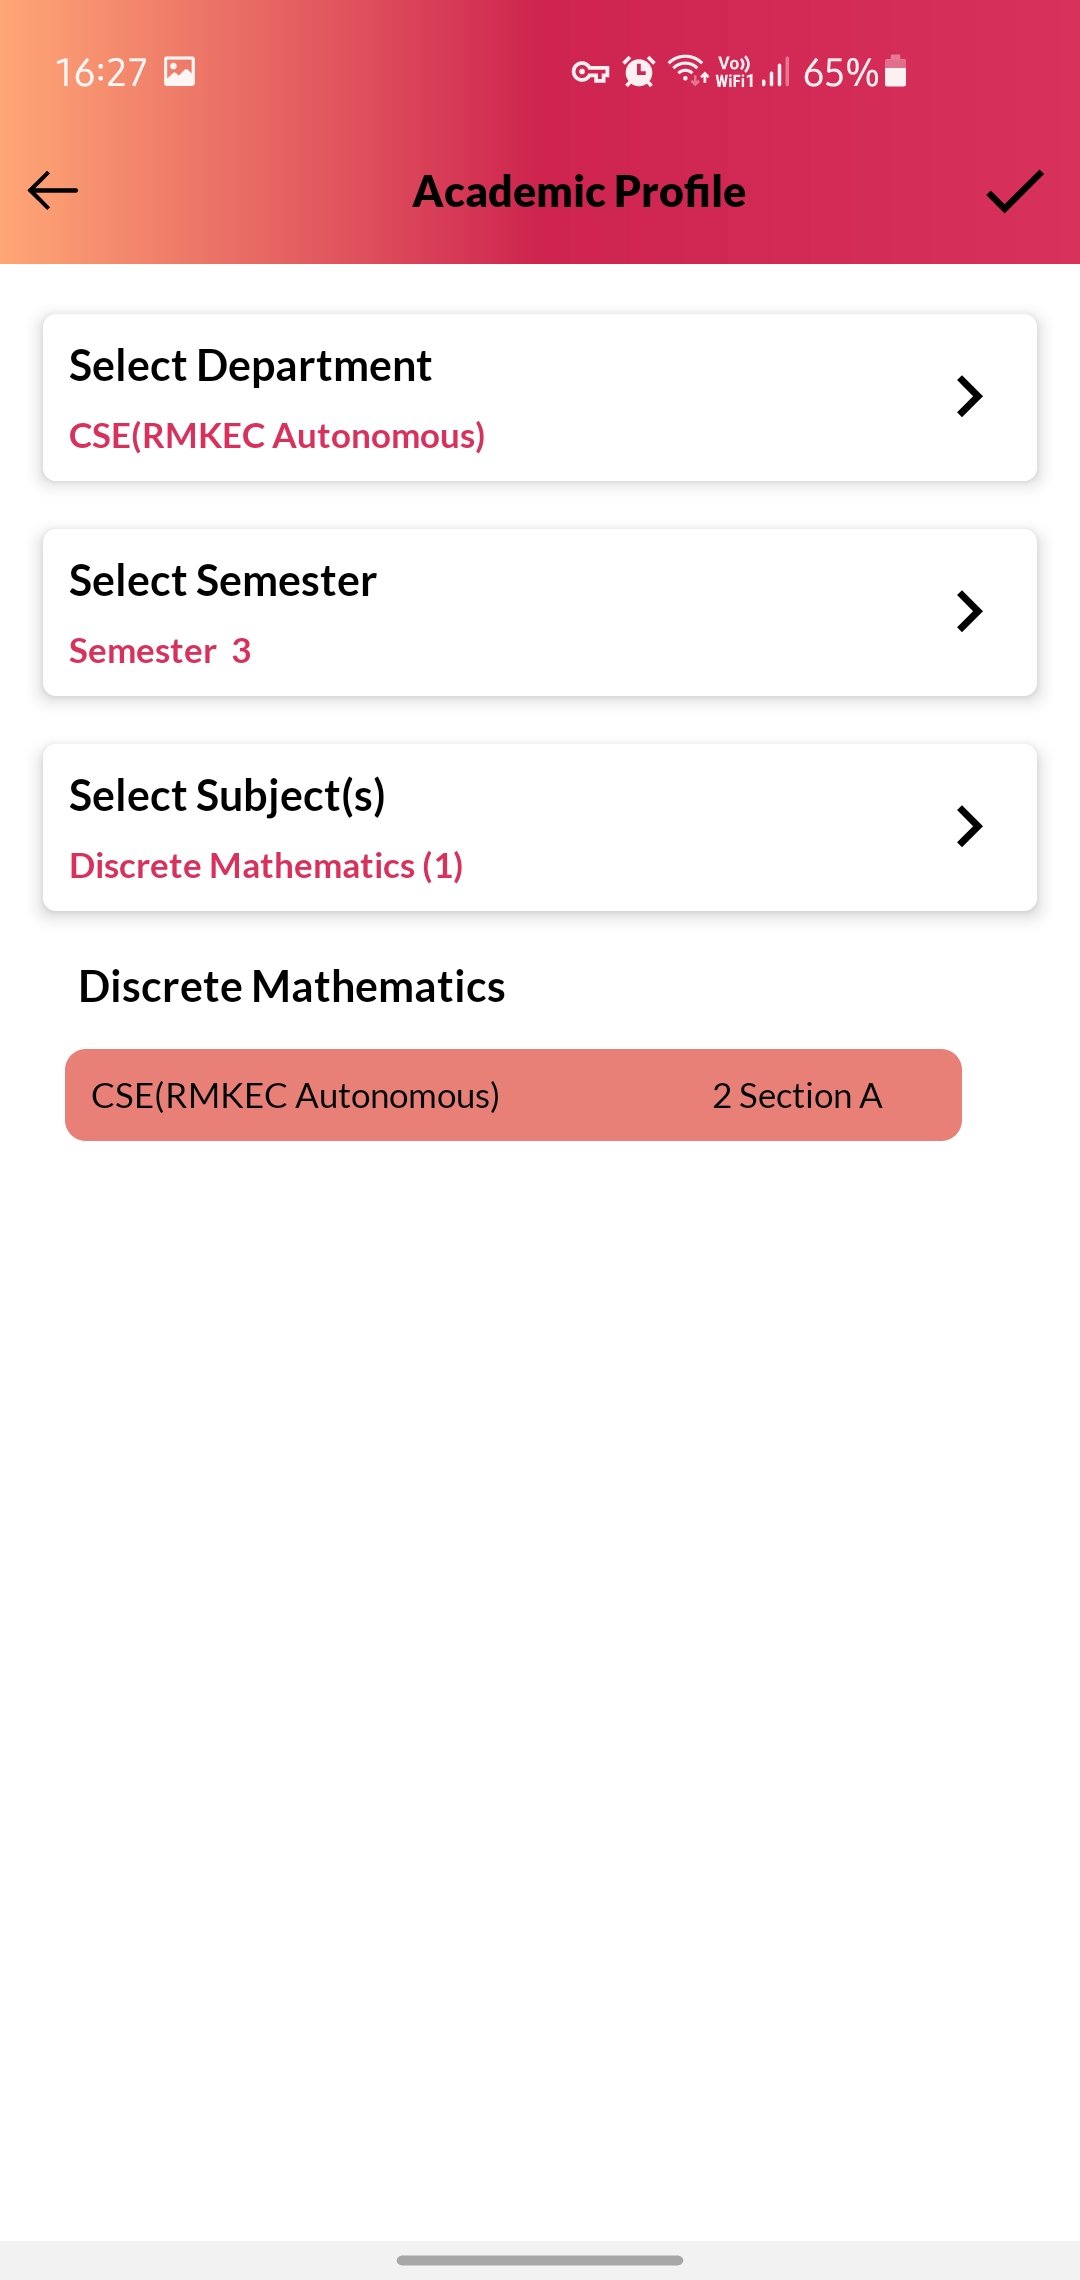 Once you select the desired classes, tap on tick mark on top right corner to successfully add the courses / sections to your Academic Profile.